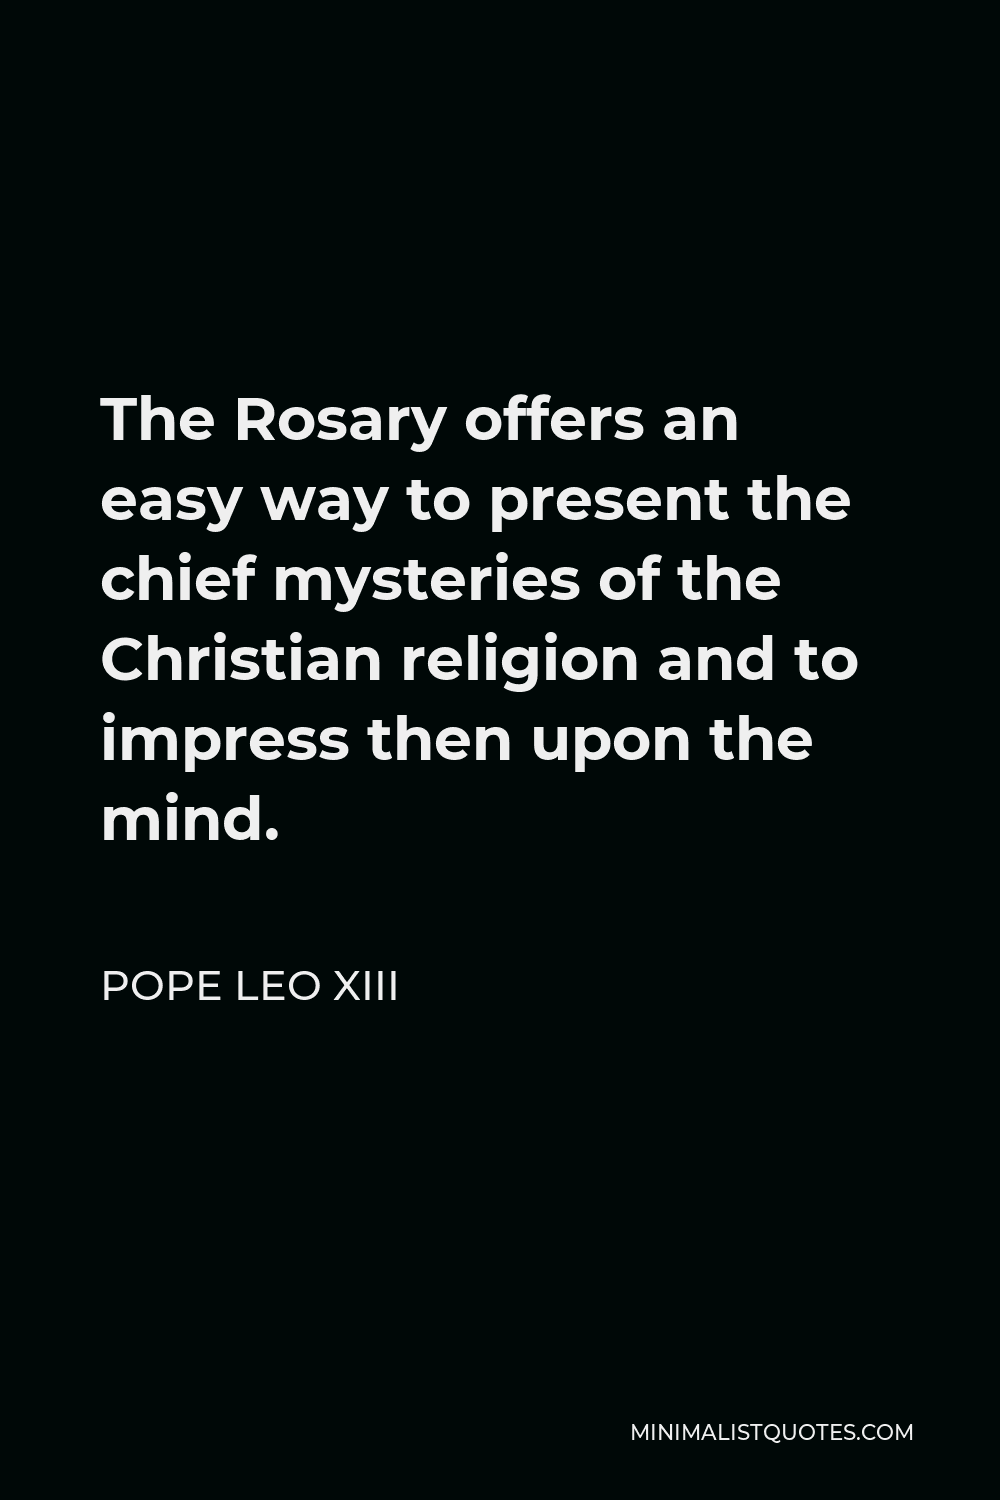 Pope Leo XIII Quote - The Rosary offers an easy way to present the chief mysteries of the Christian religion and to impress then upon the mind.